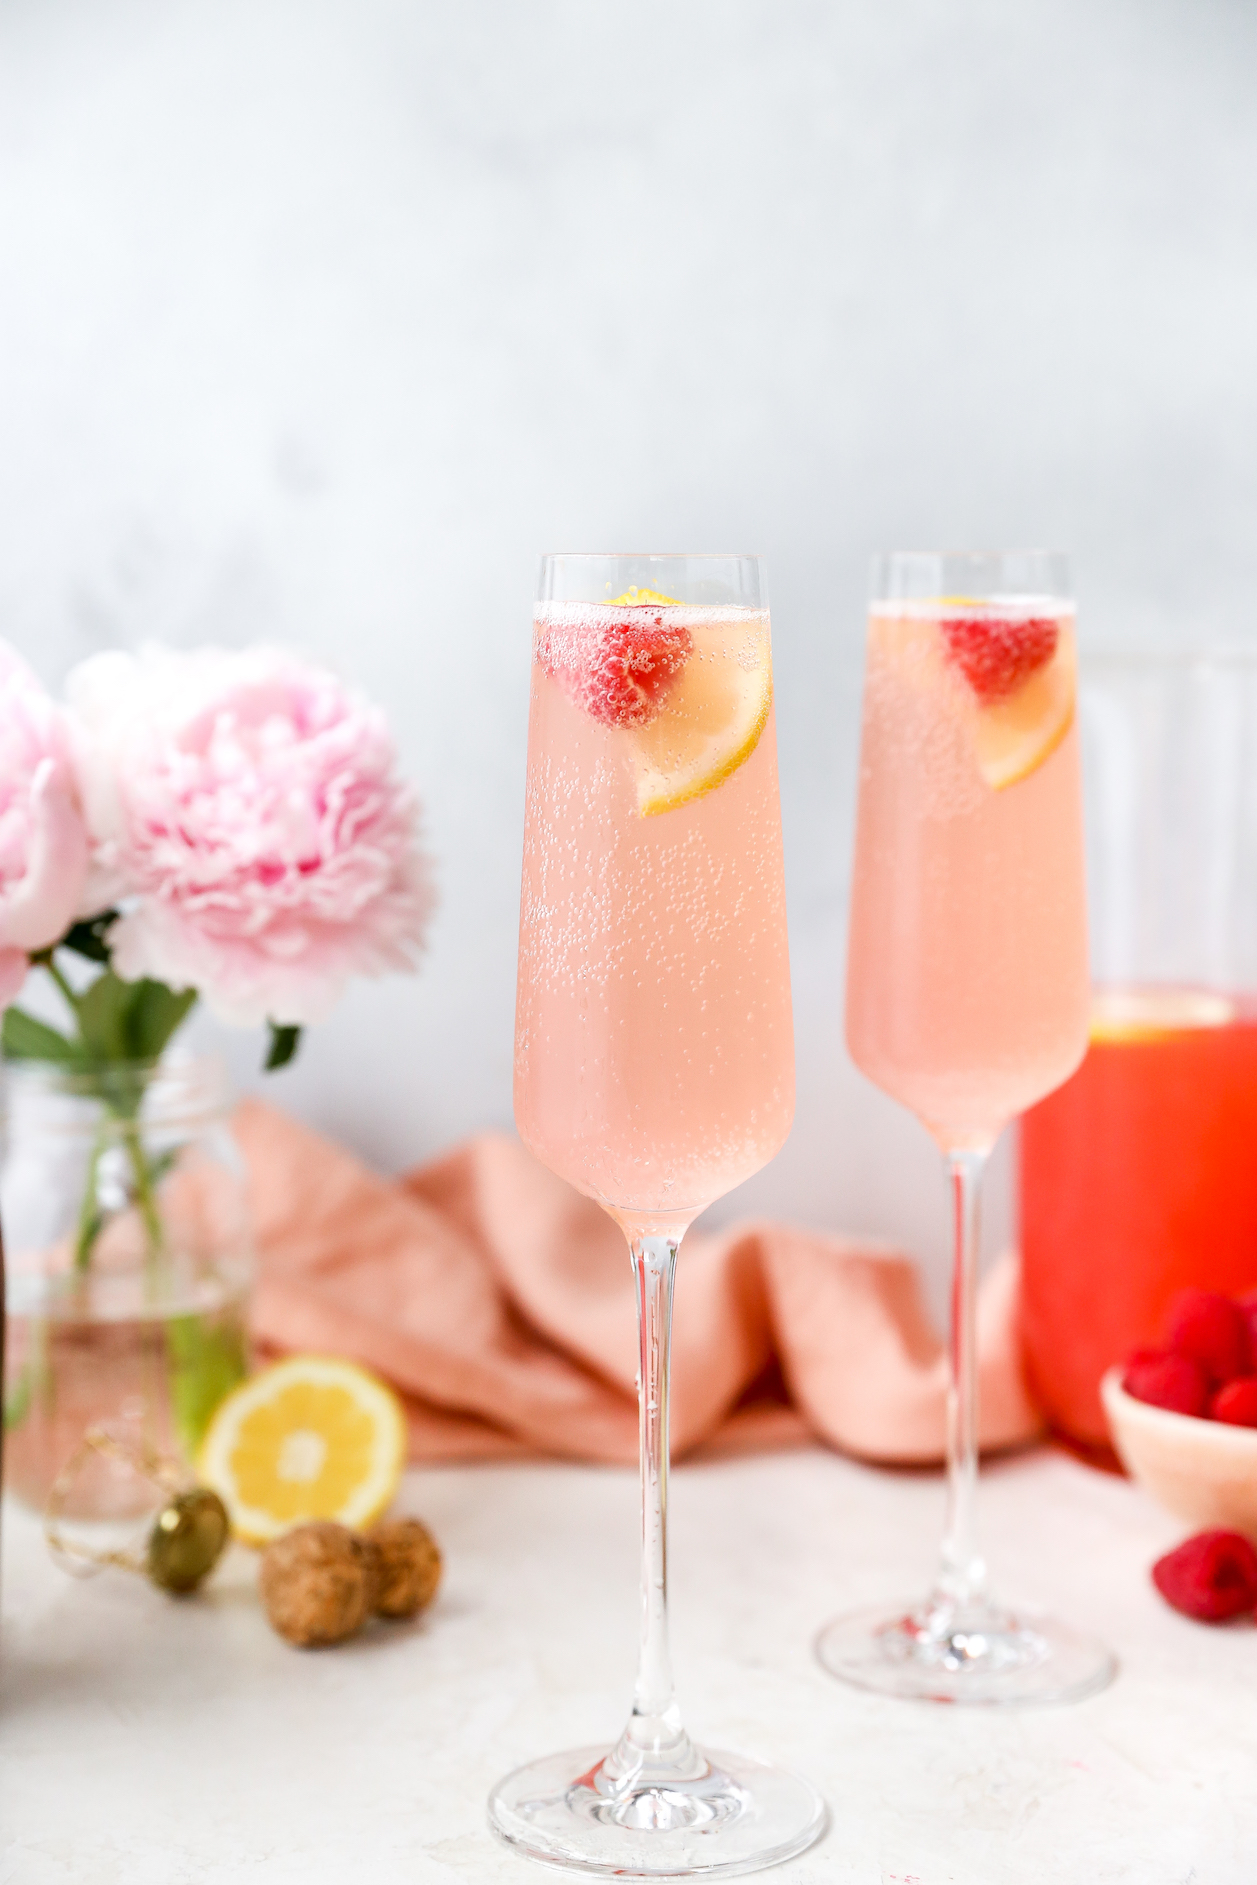 Mimosa Recipe - Cocktails & Drinks